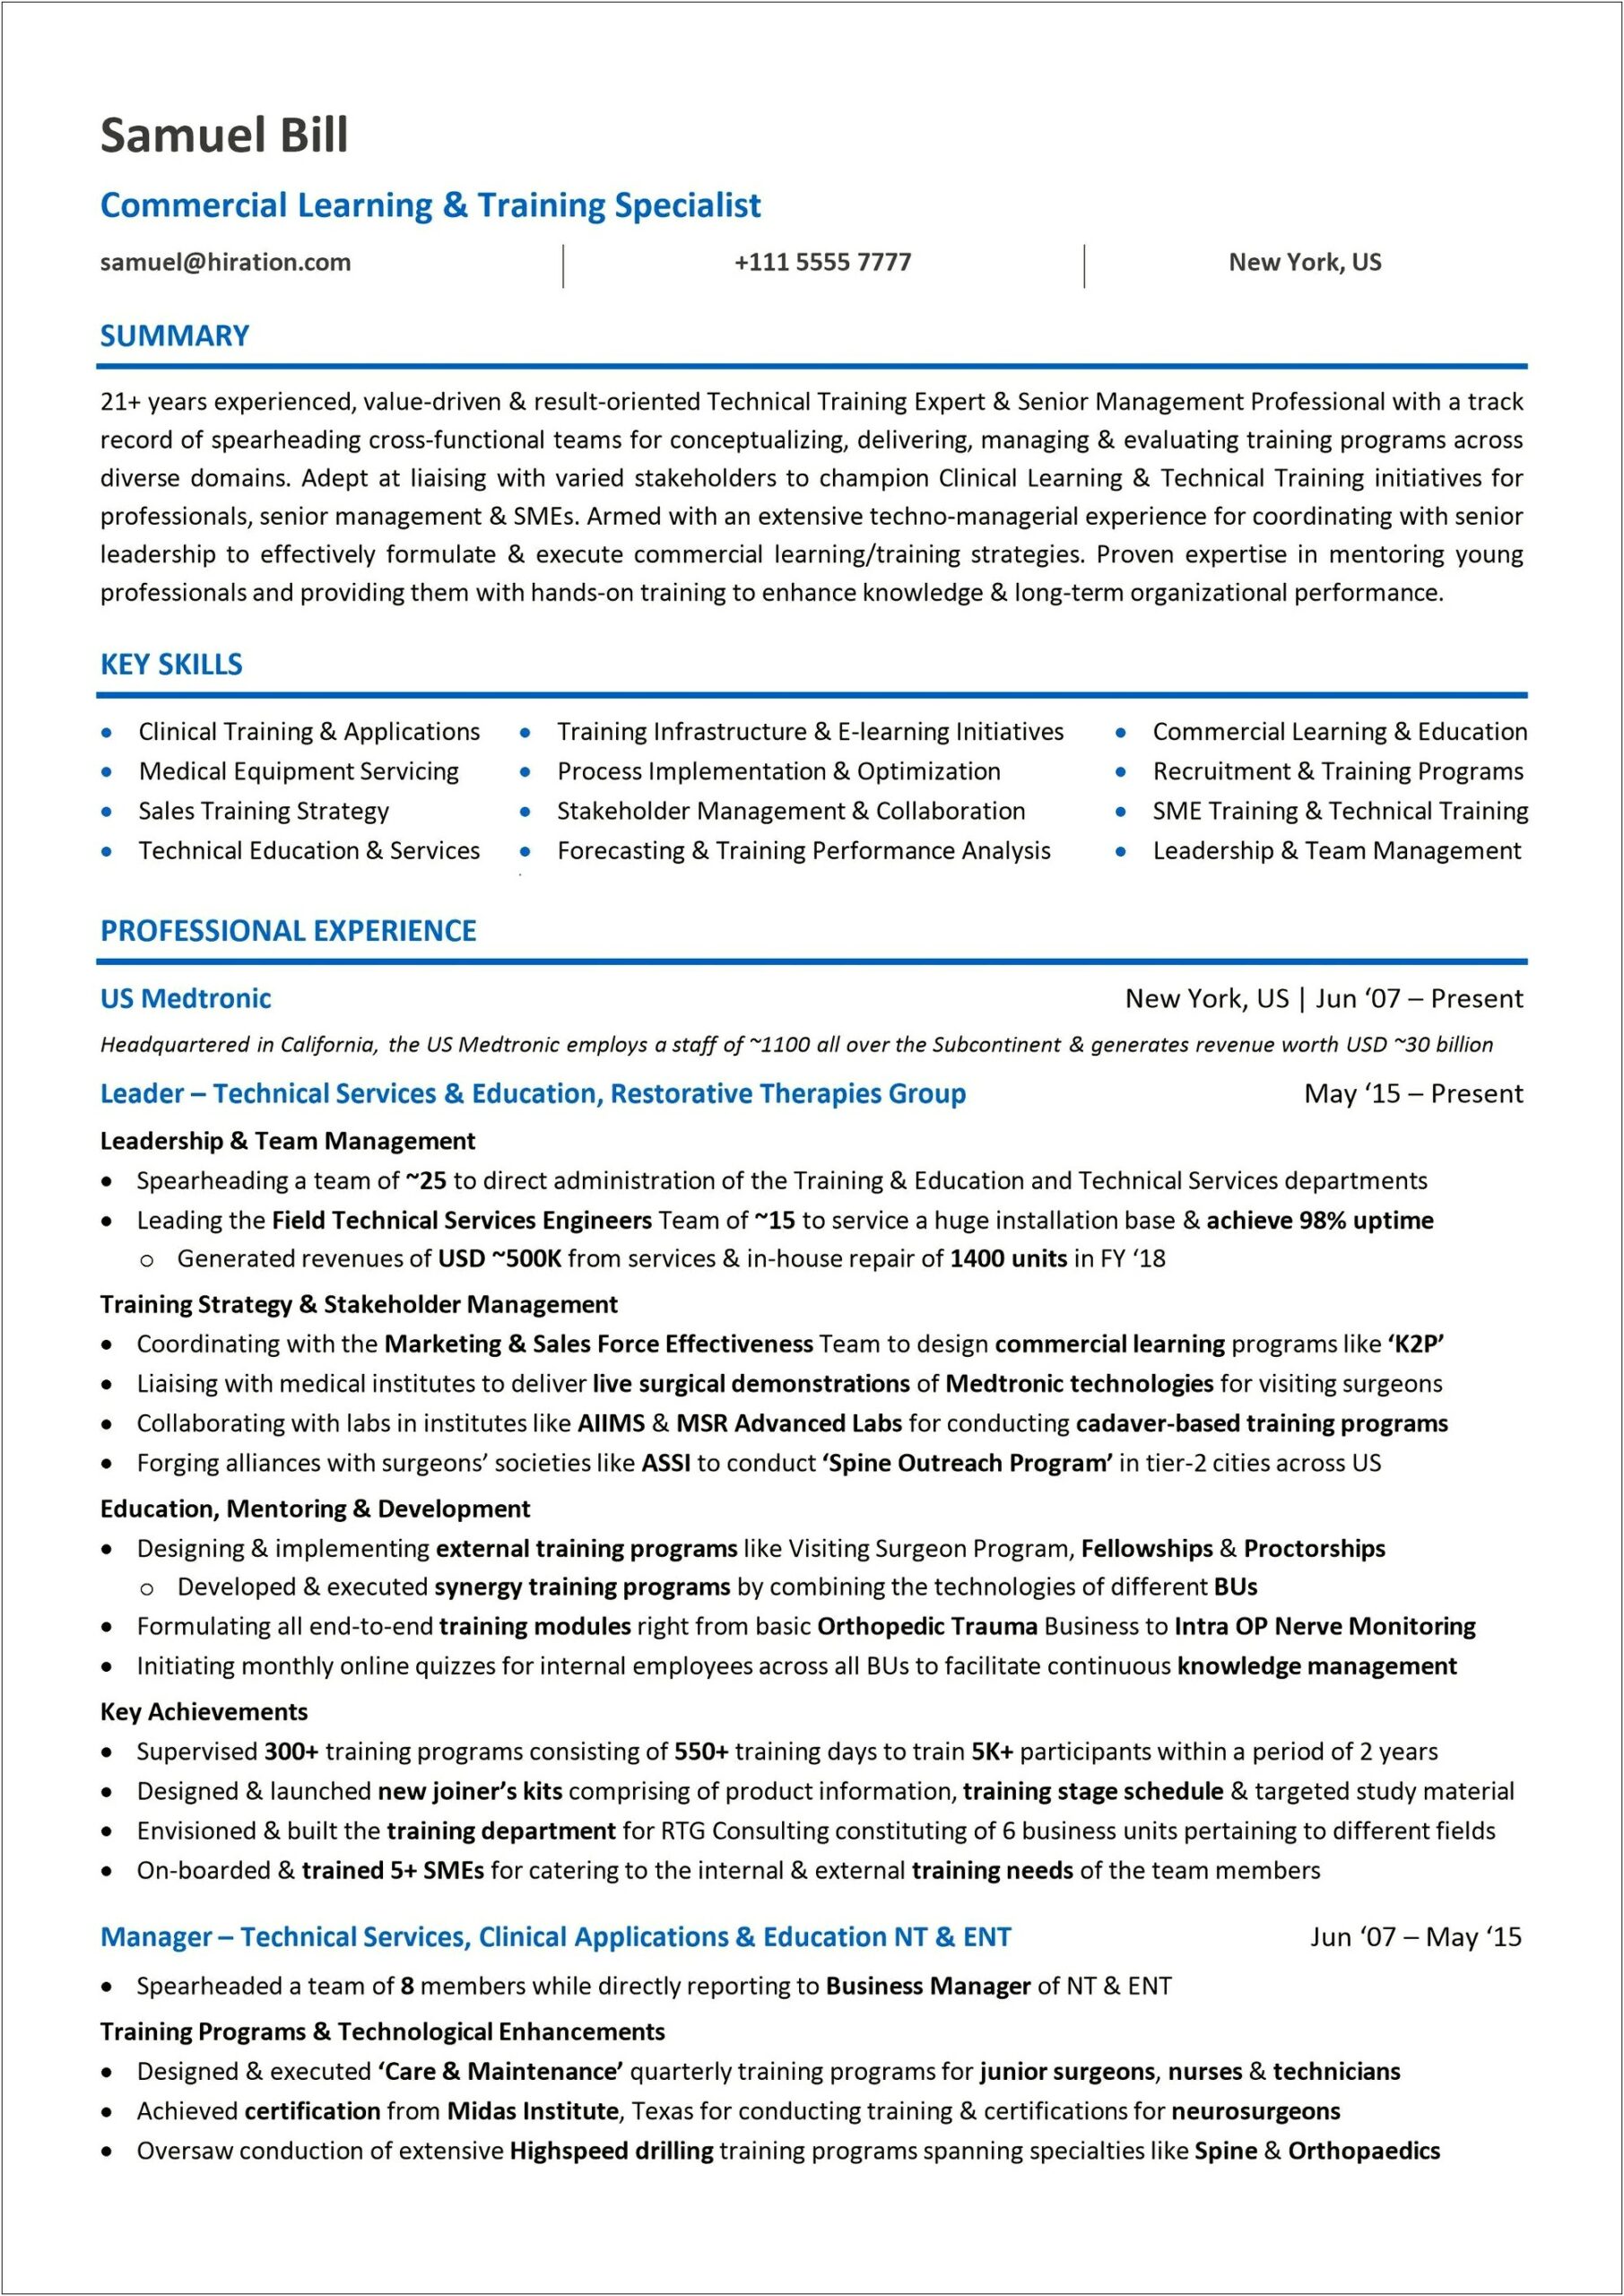 Resume Professional Summary For Career Change